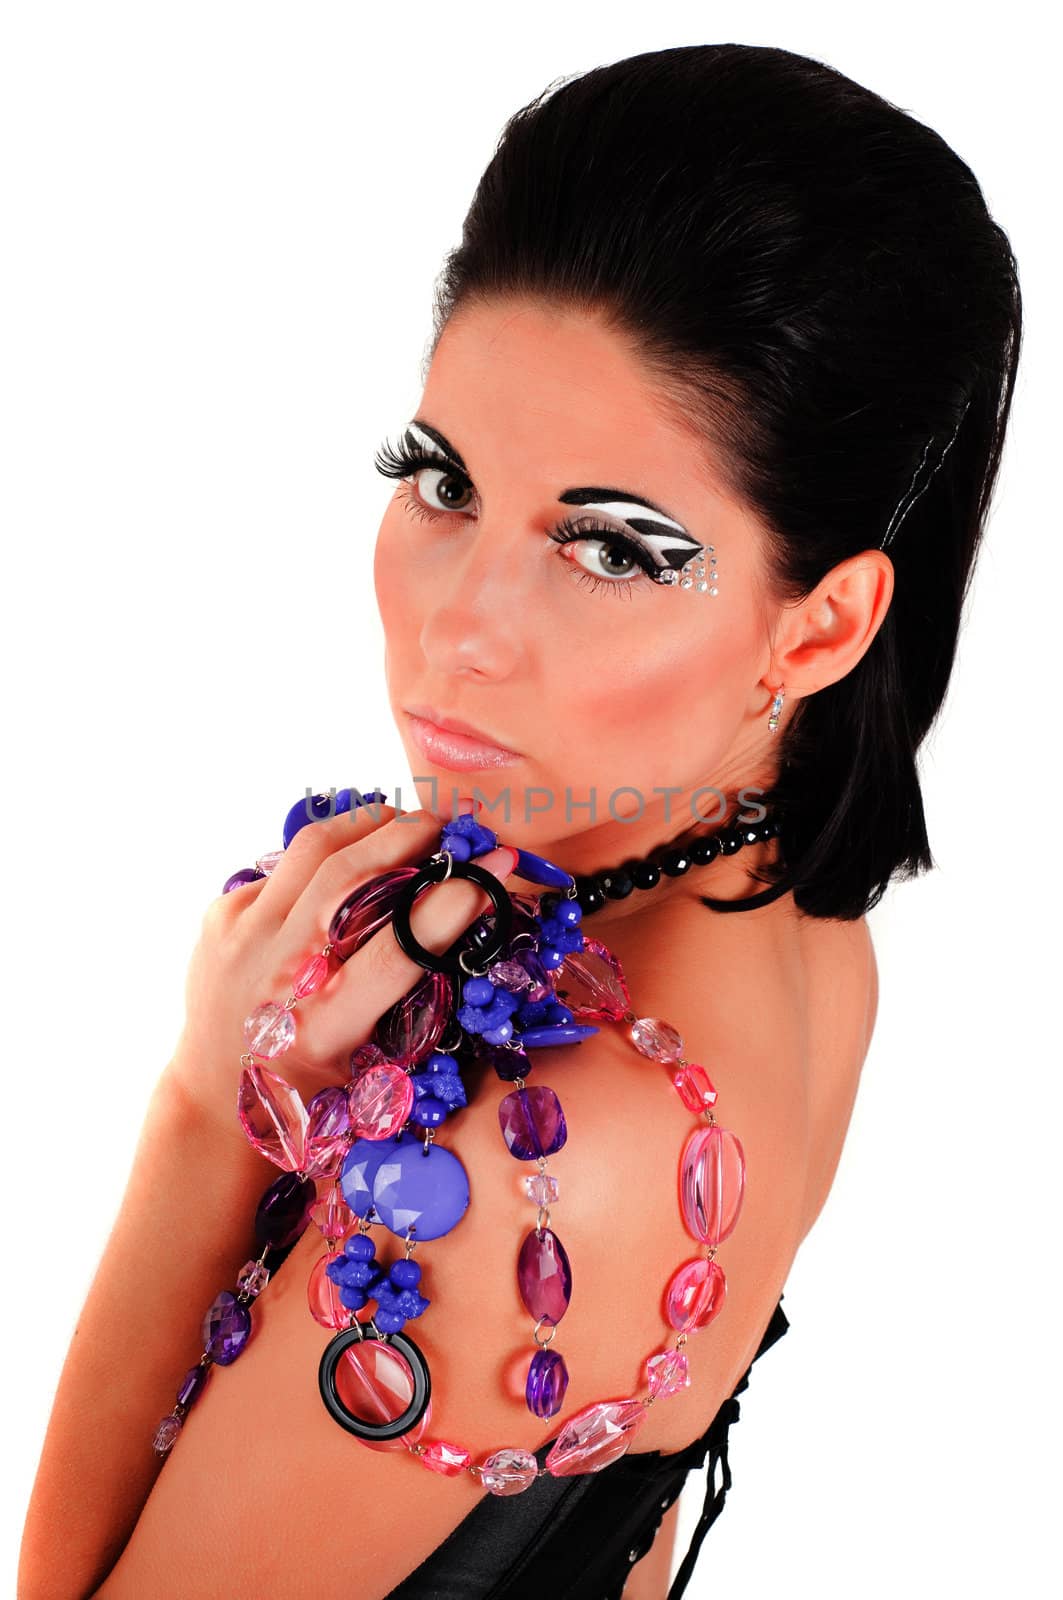 Closeup fashion shoot of woman with color face art